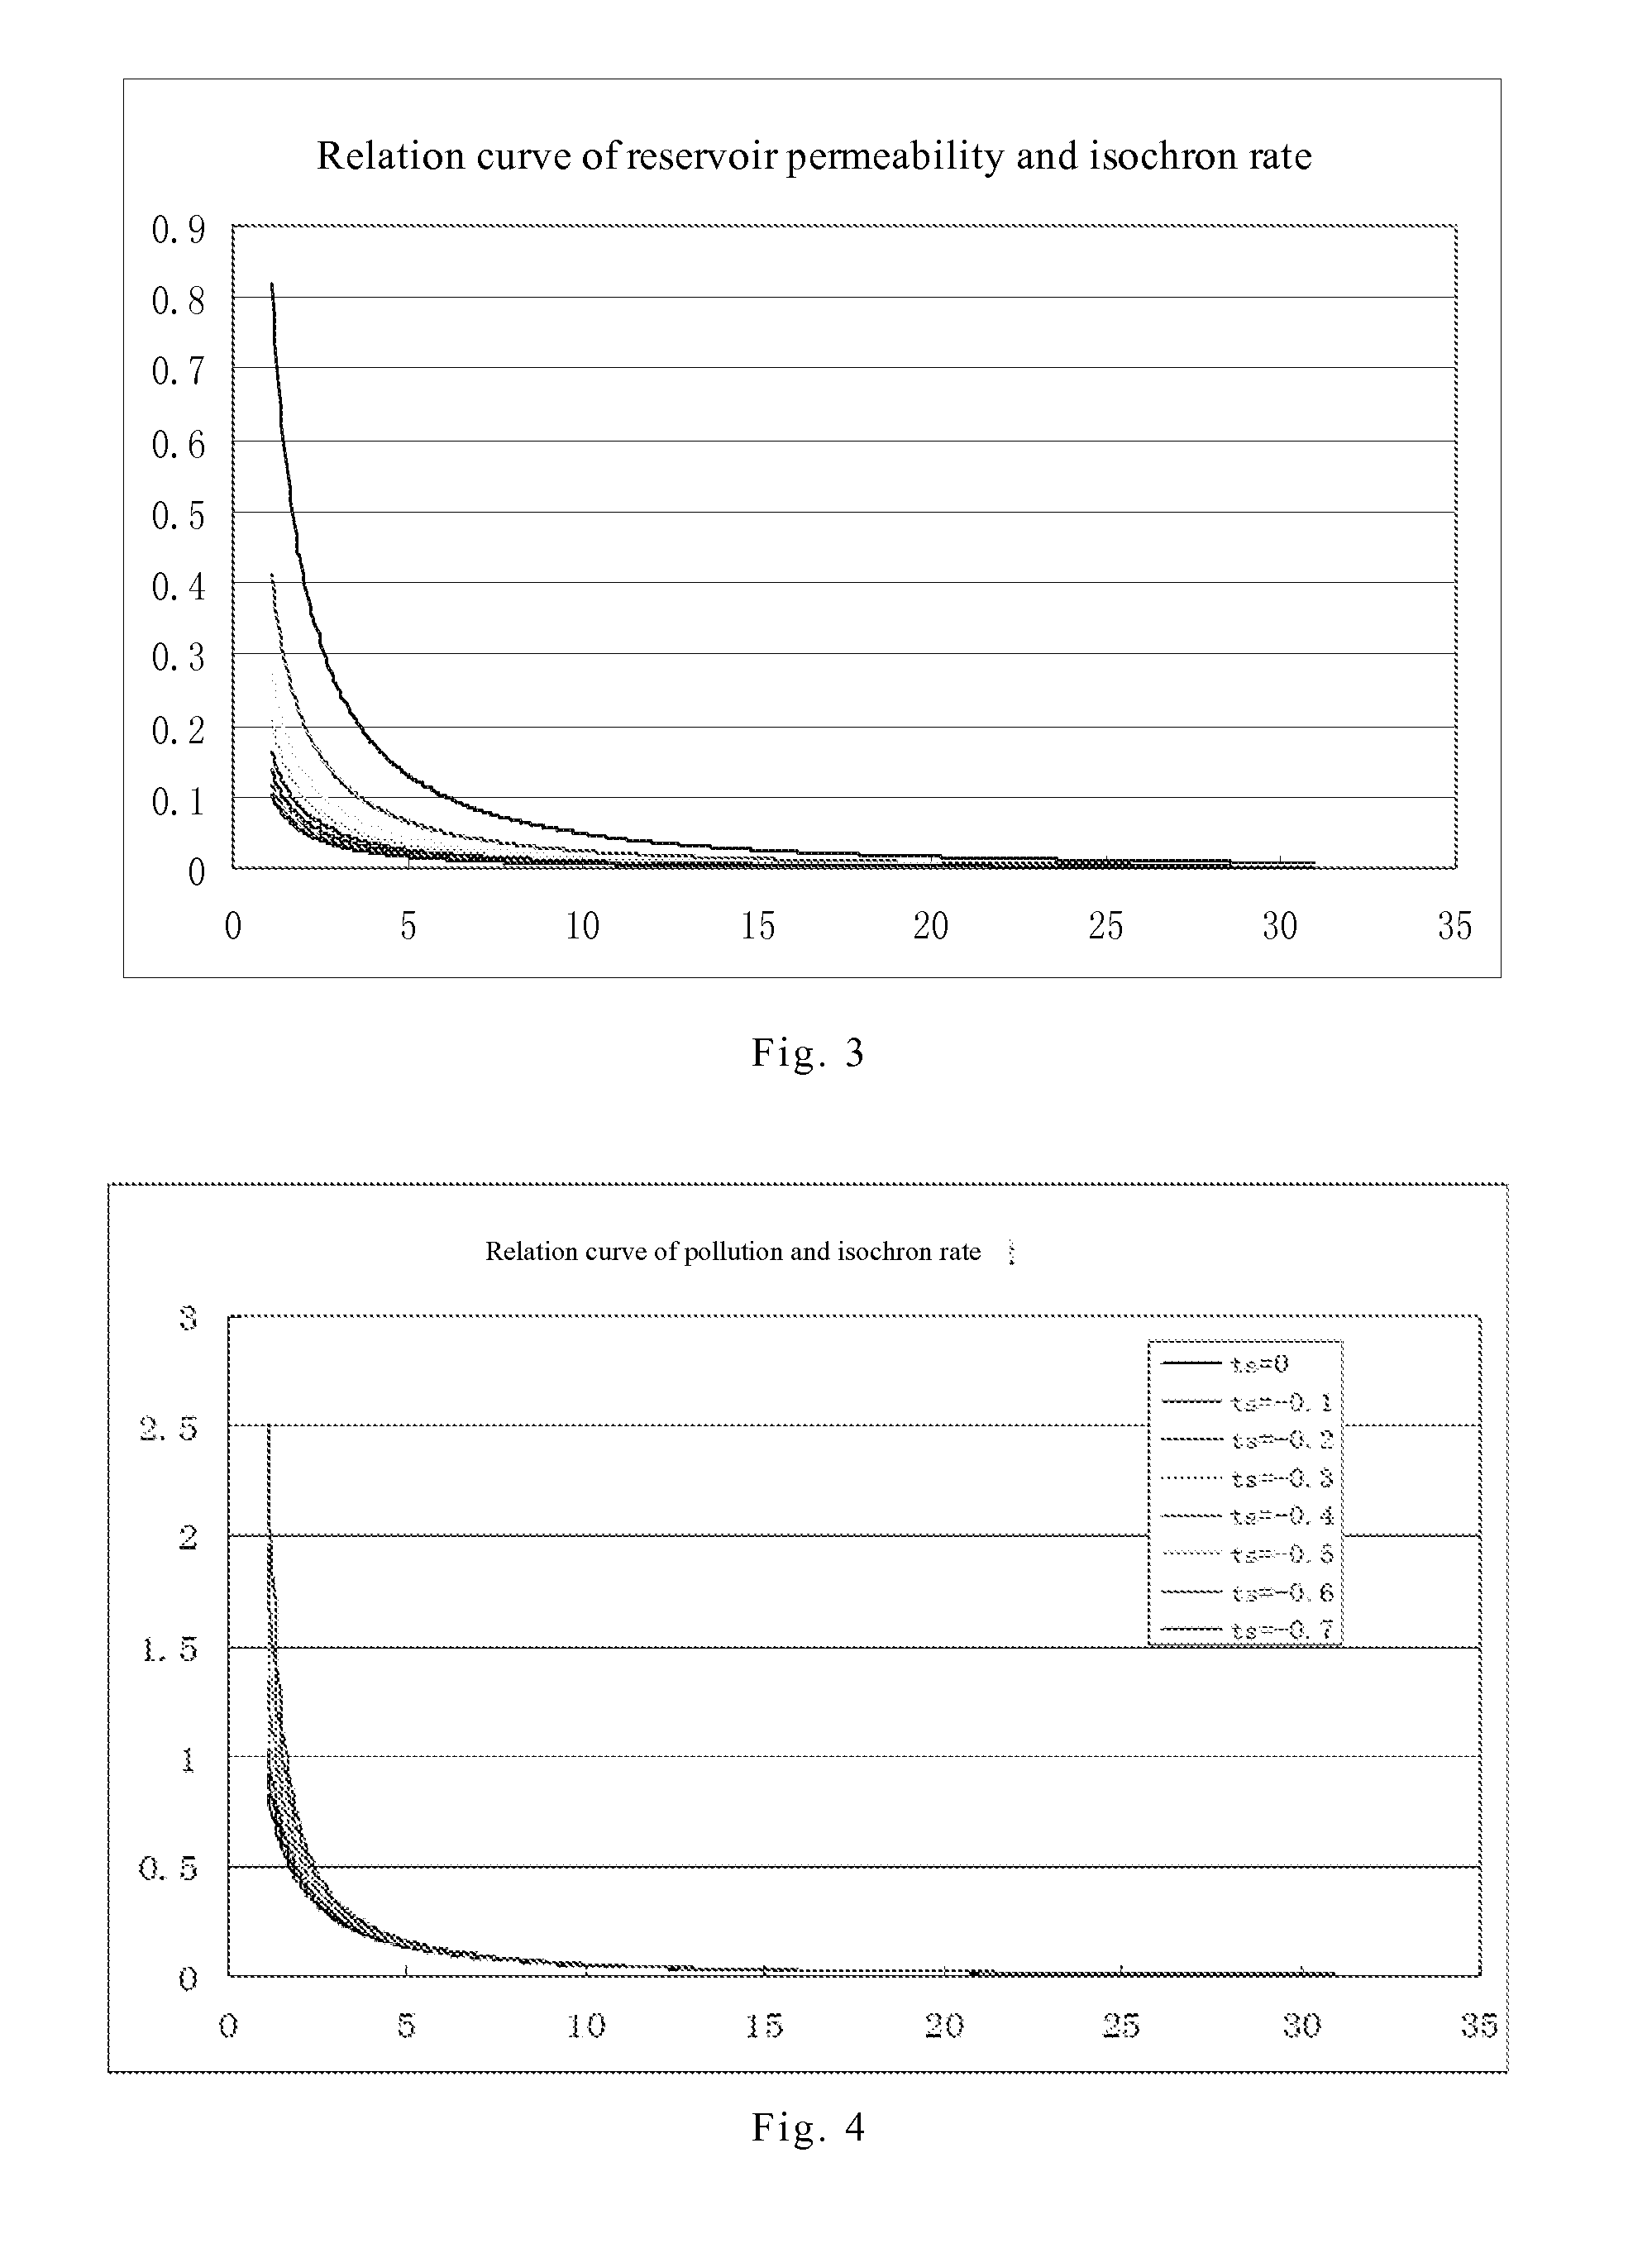 Method and system for analyzing and processing continued flow data in well testing data